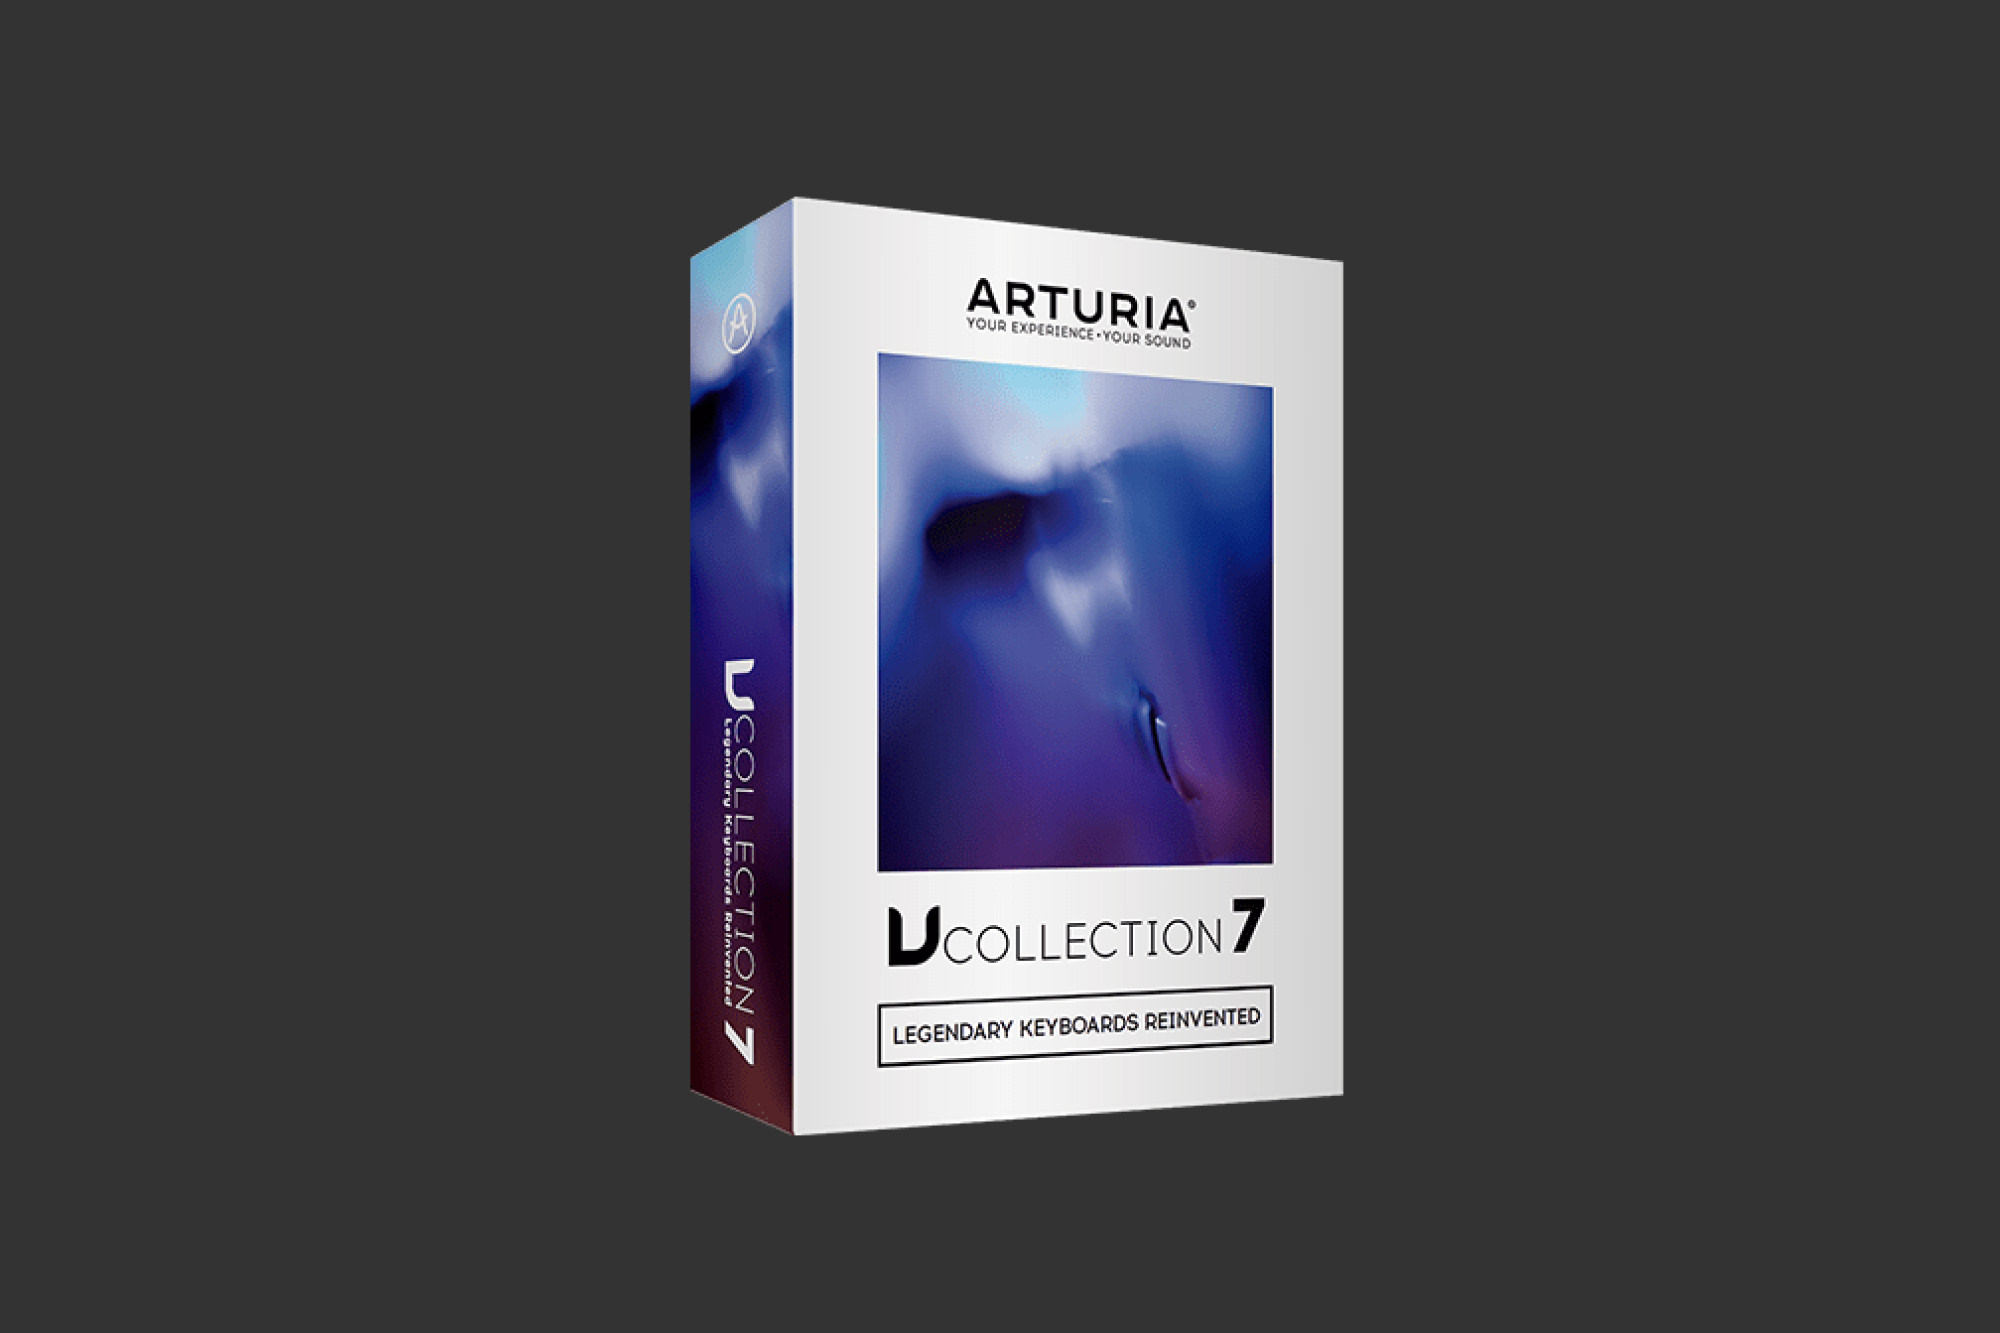 An image of the Arturia V Collection.